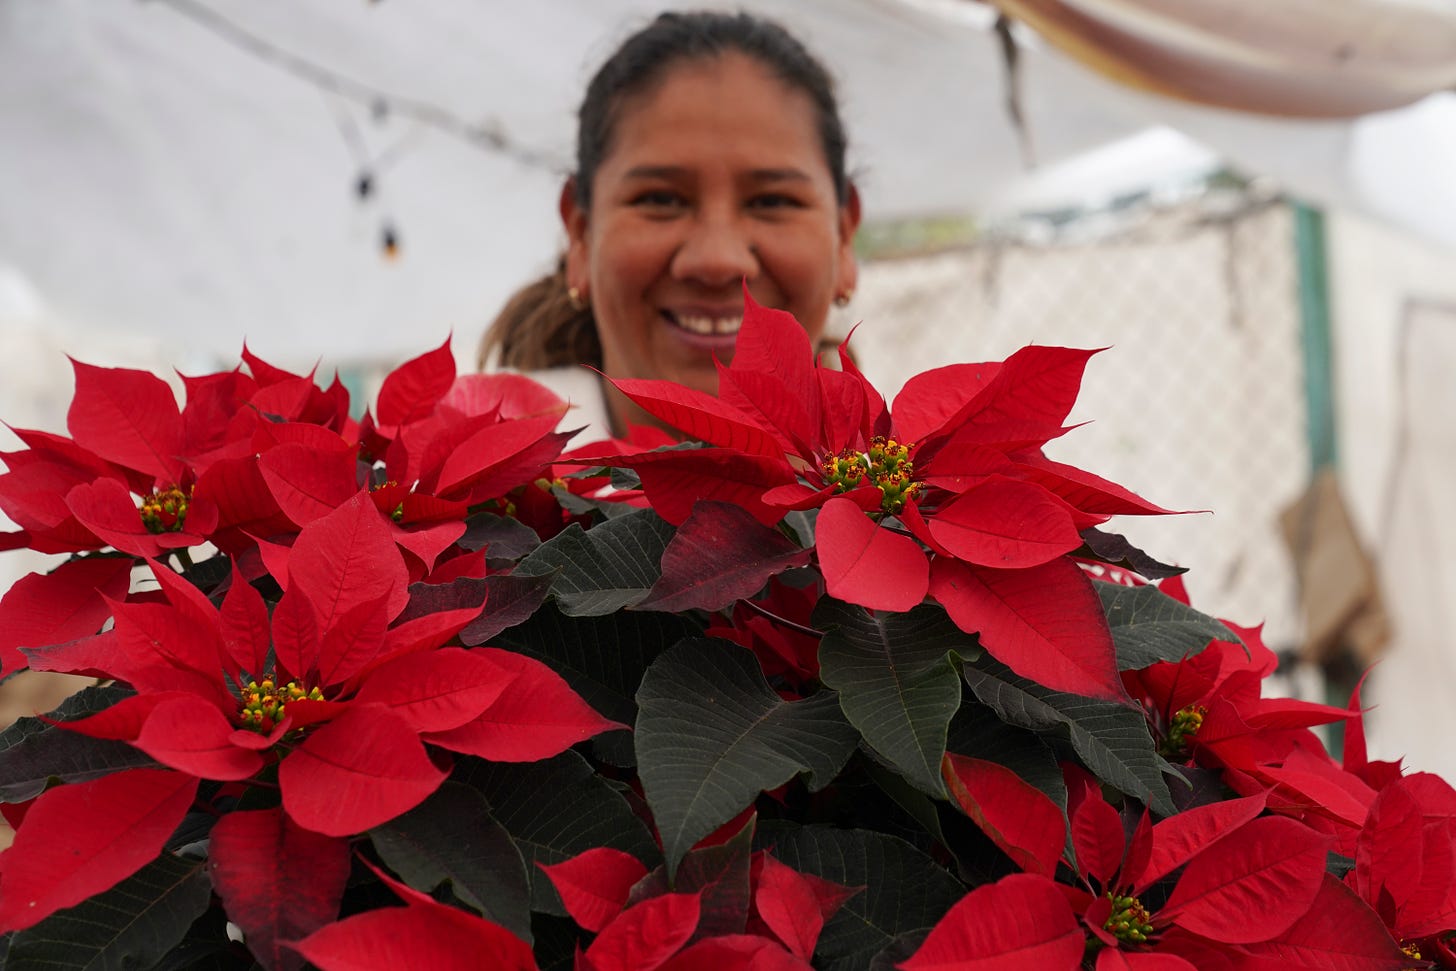 Dora Luz Flores smiles wide next to her displayed poinsettias for sale in the San Luis Tlaxialtemalco district of Mexico City.